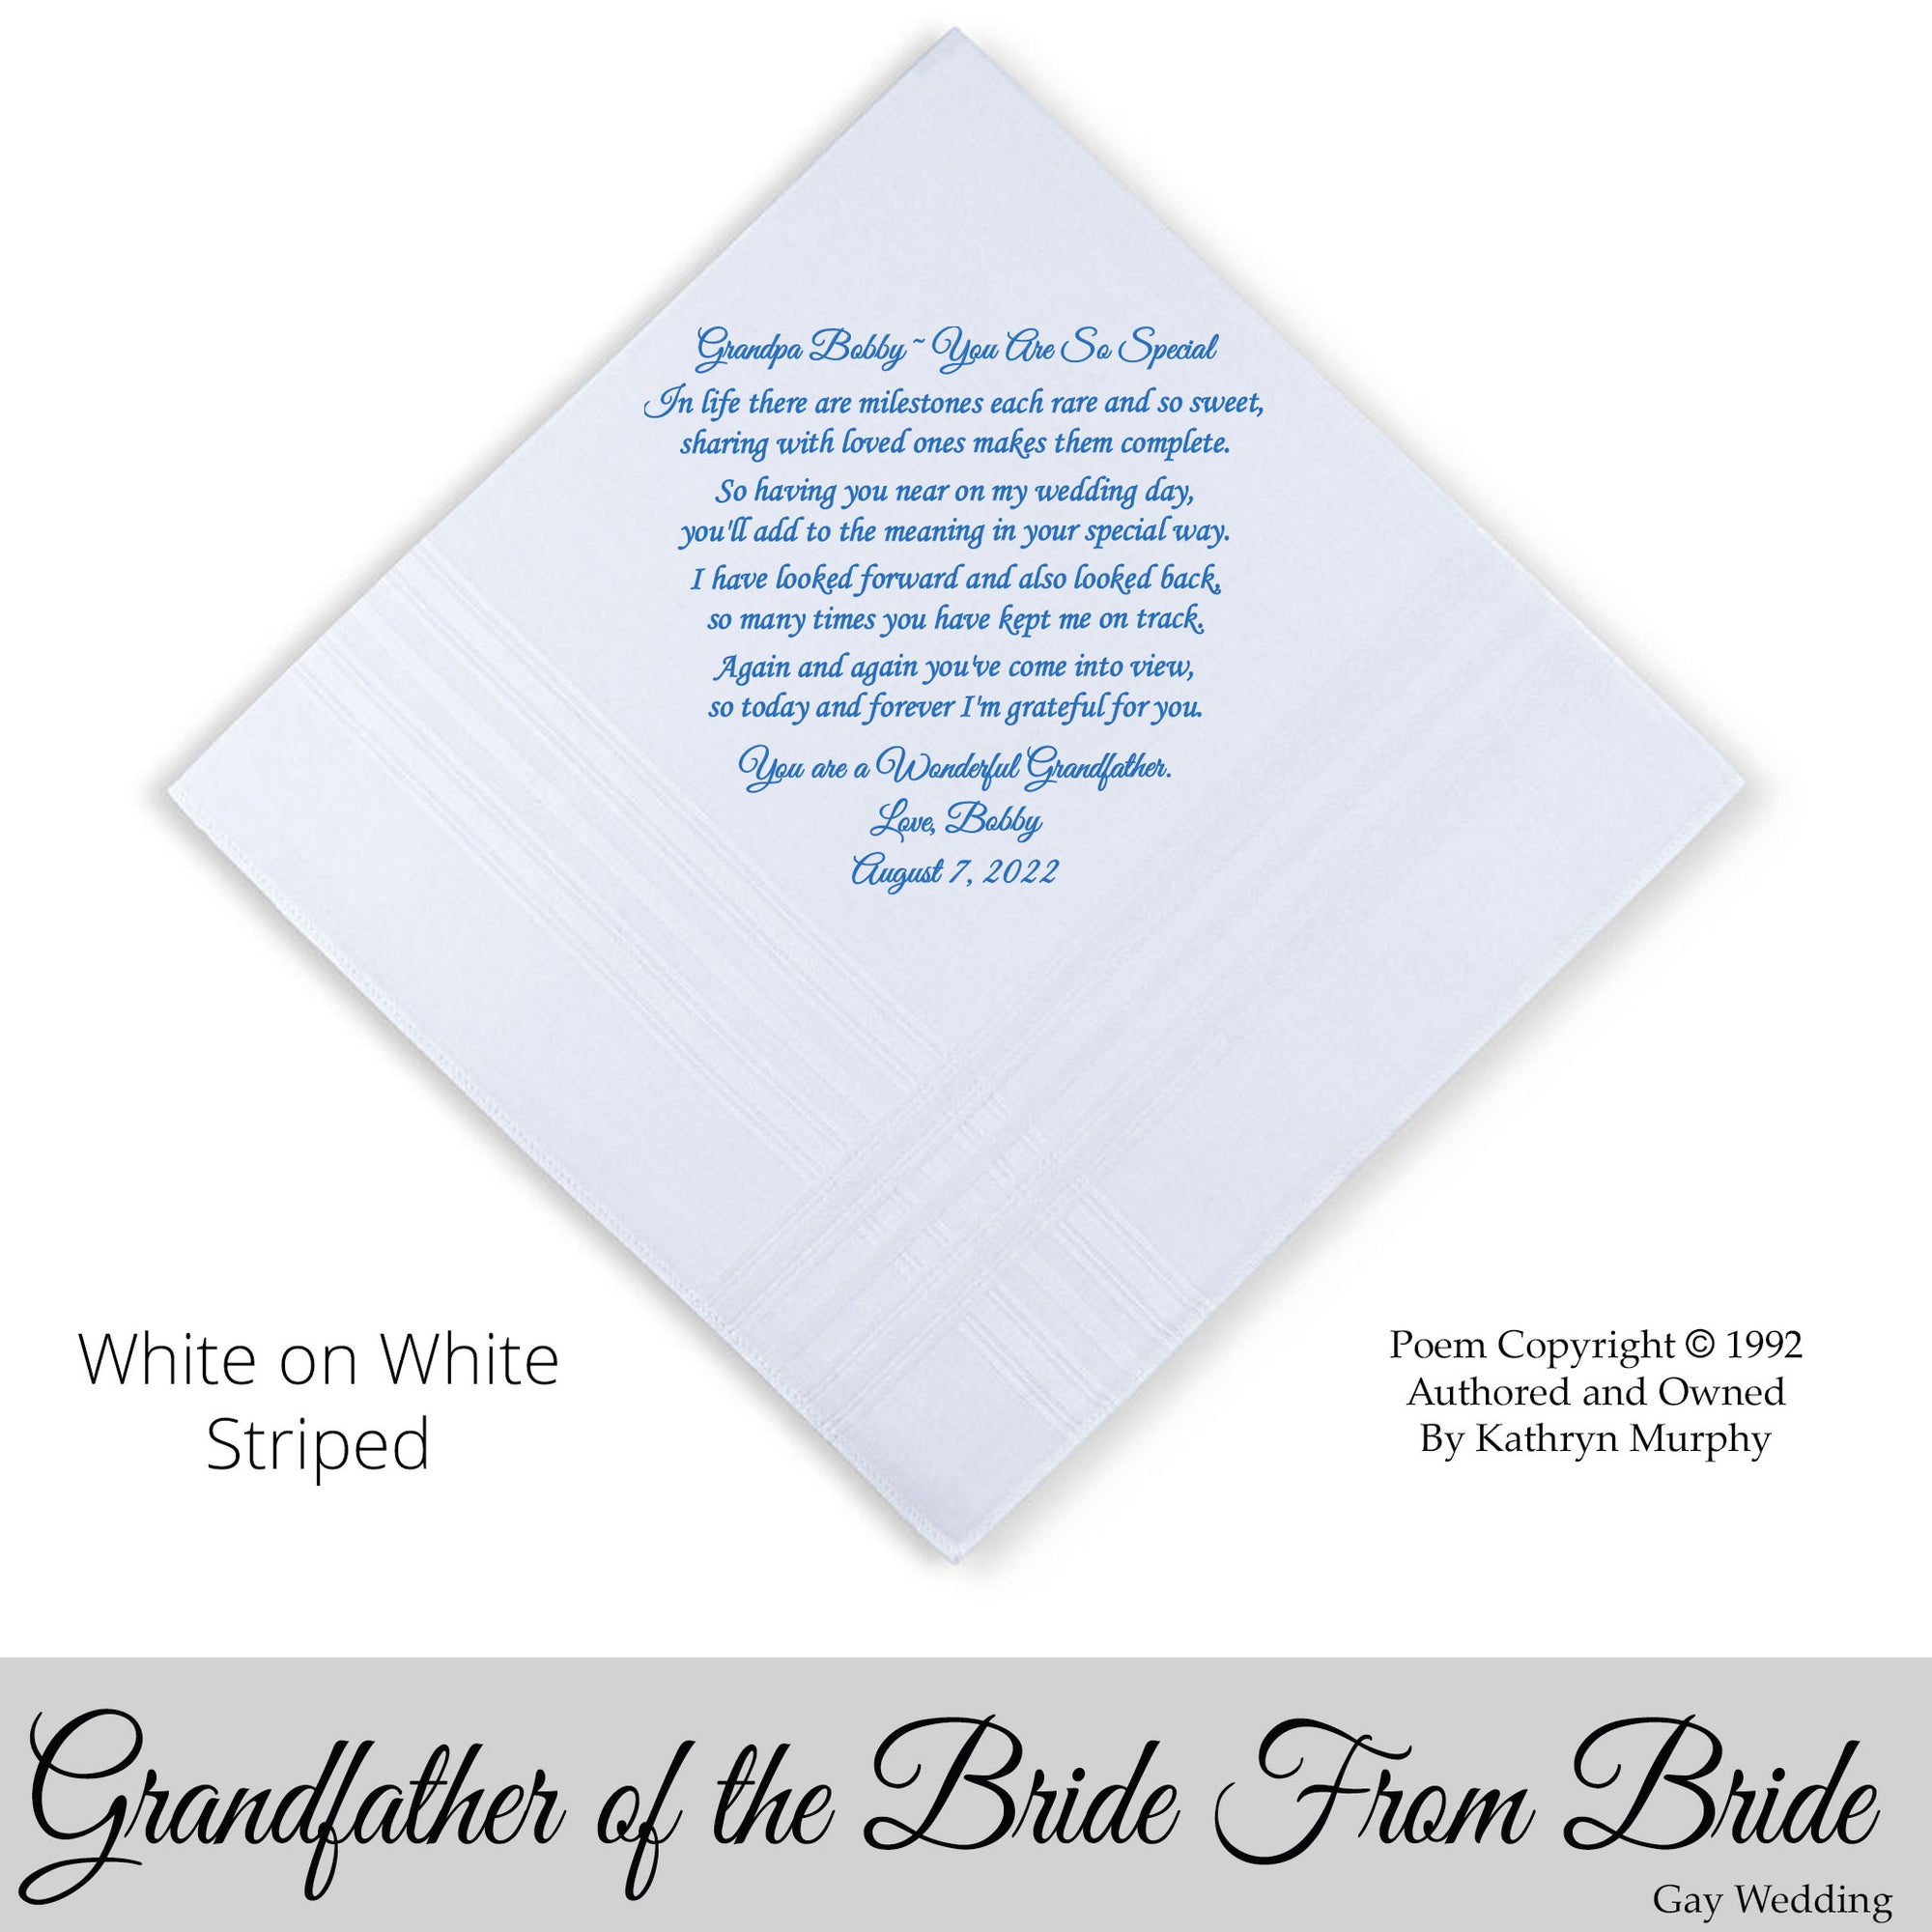 Gay Wedding Gift for the Grandfather of the Bride poem printed wedding hankie